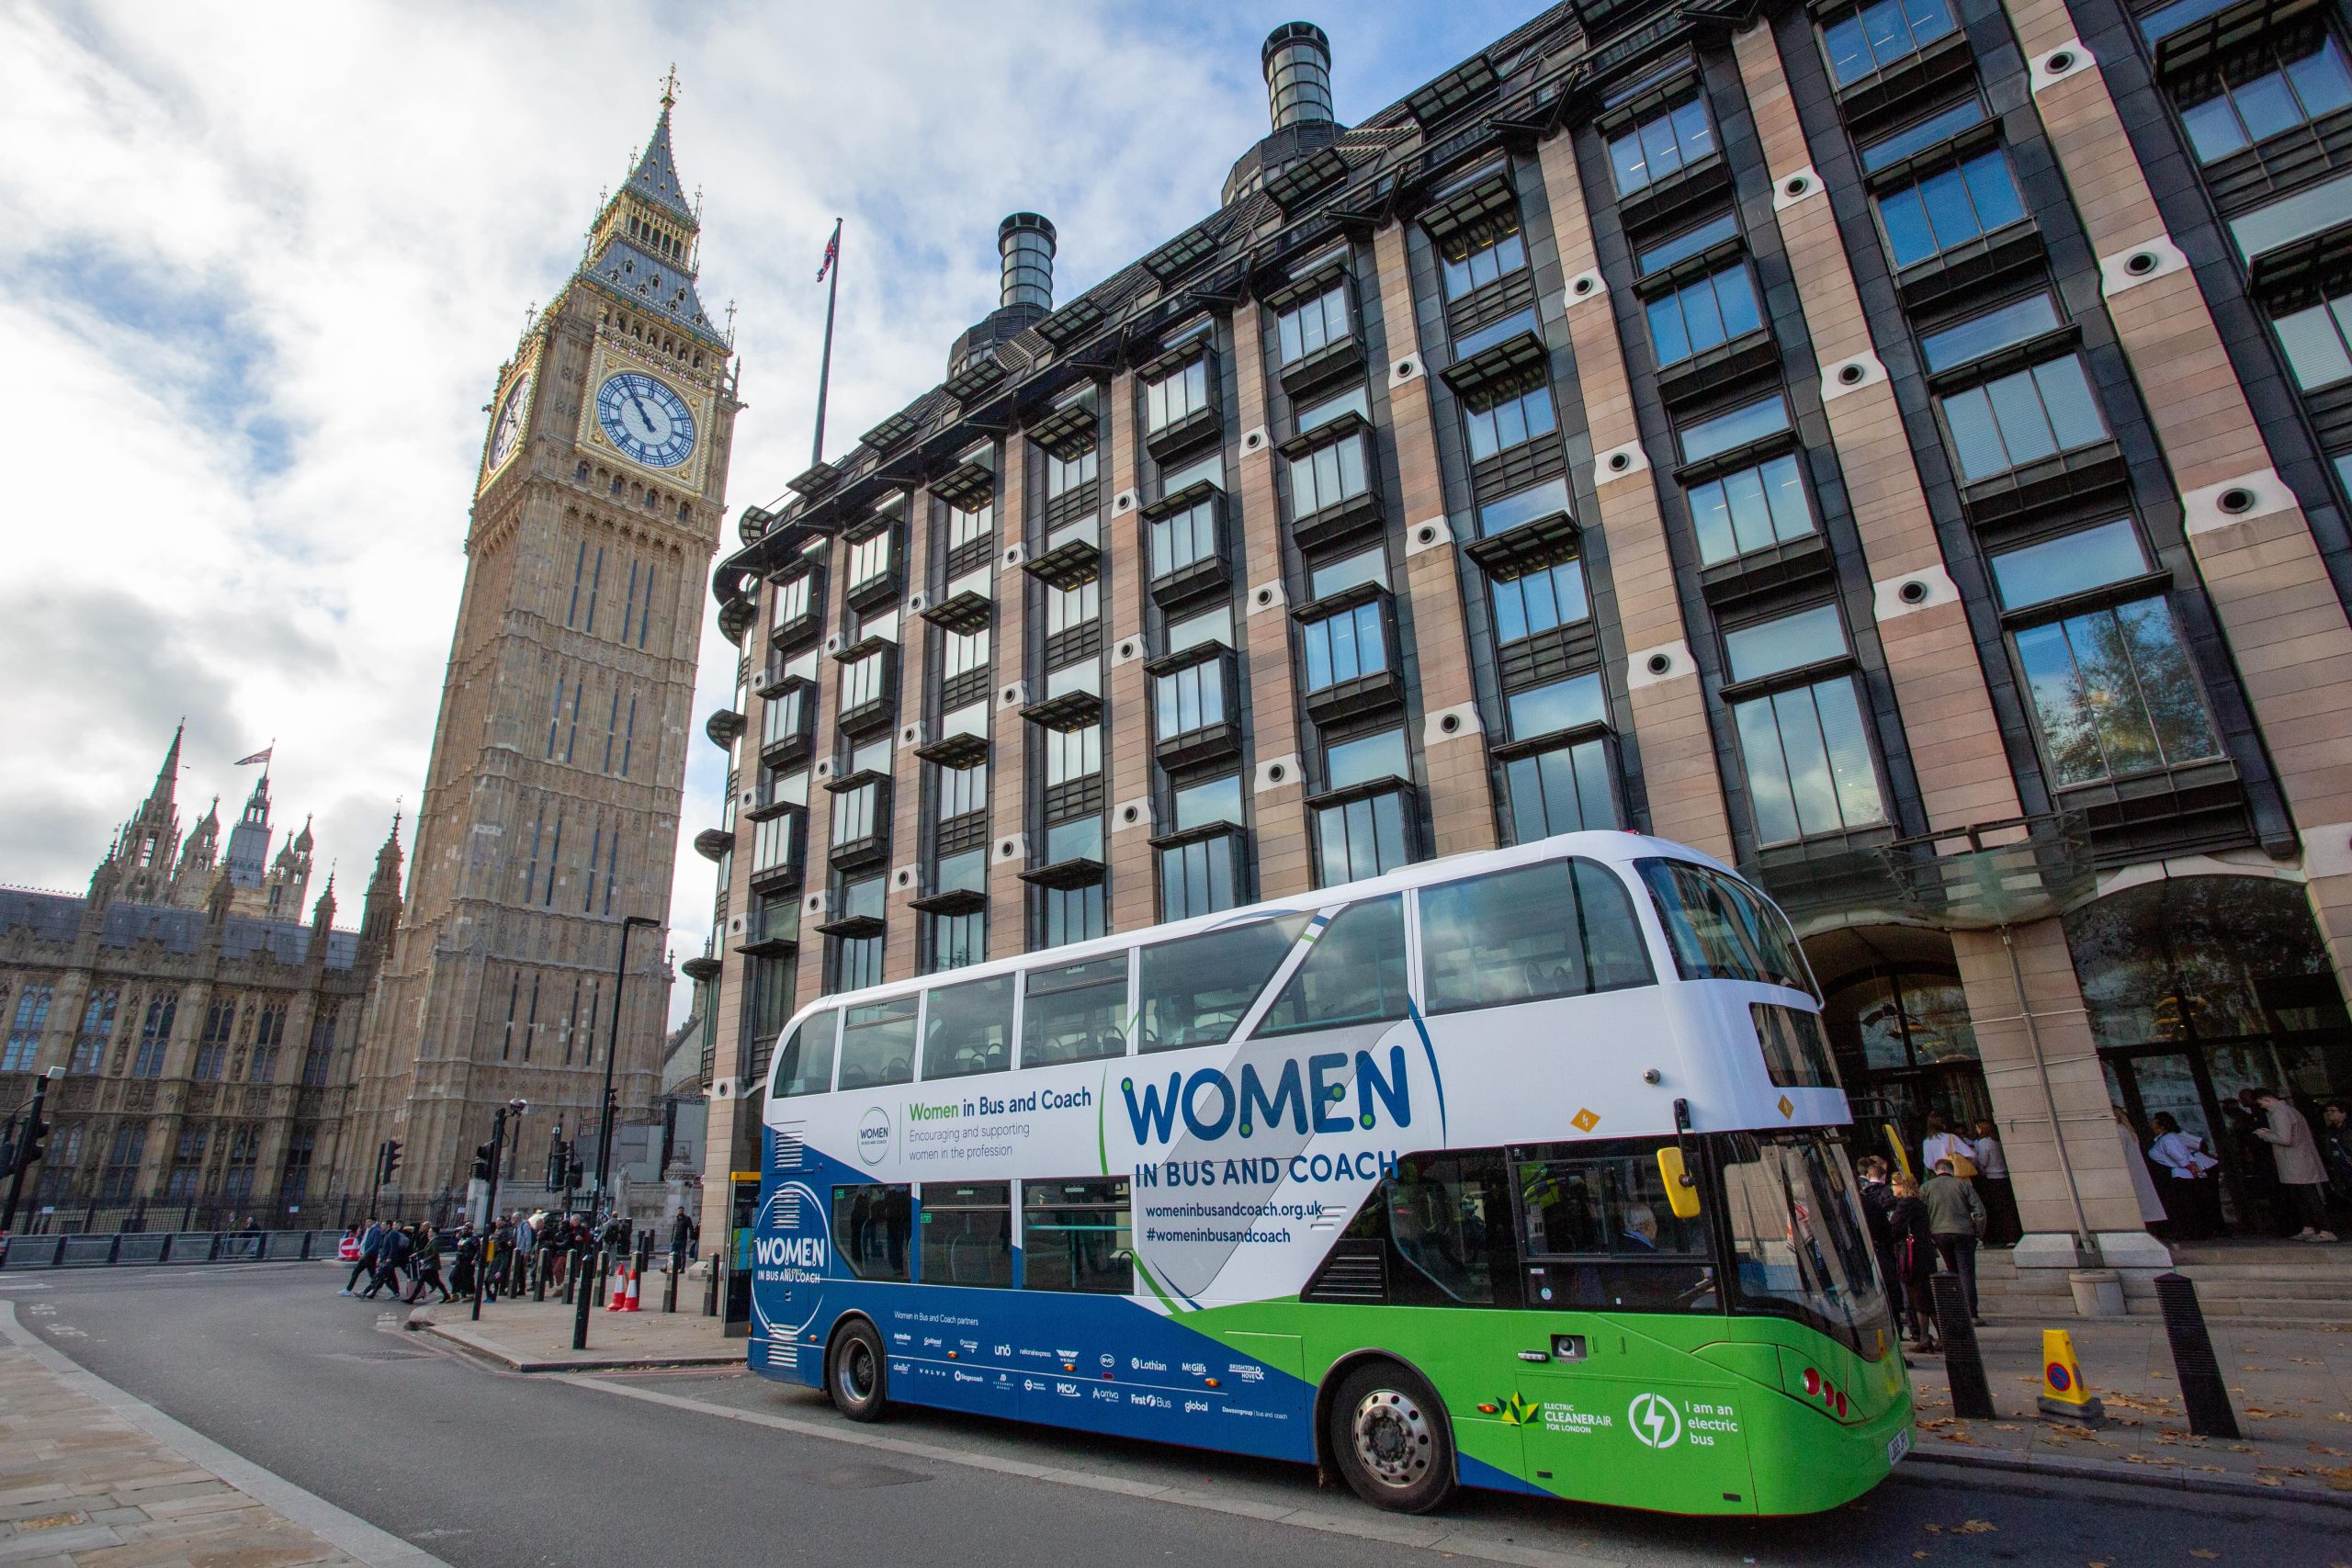 Women in Bus and Coach Parliamentary event